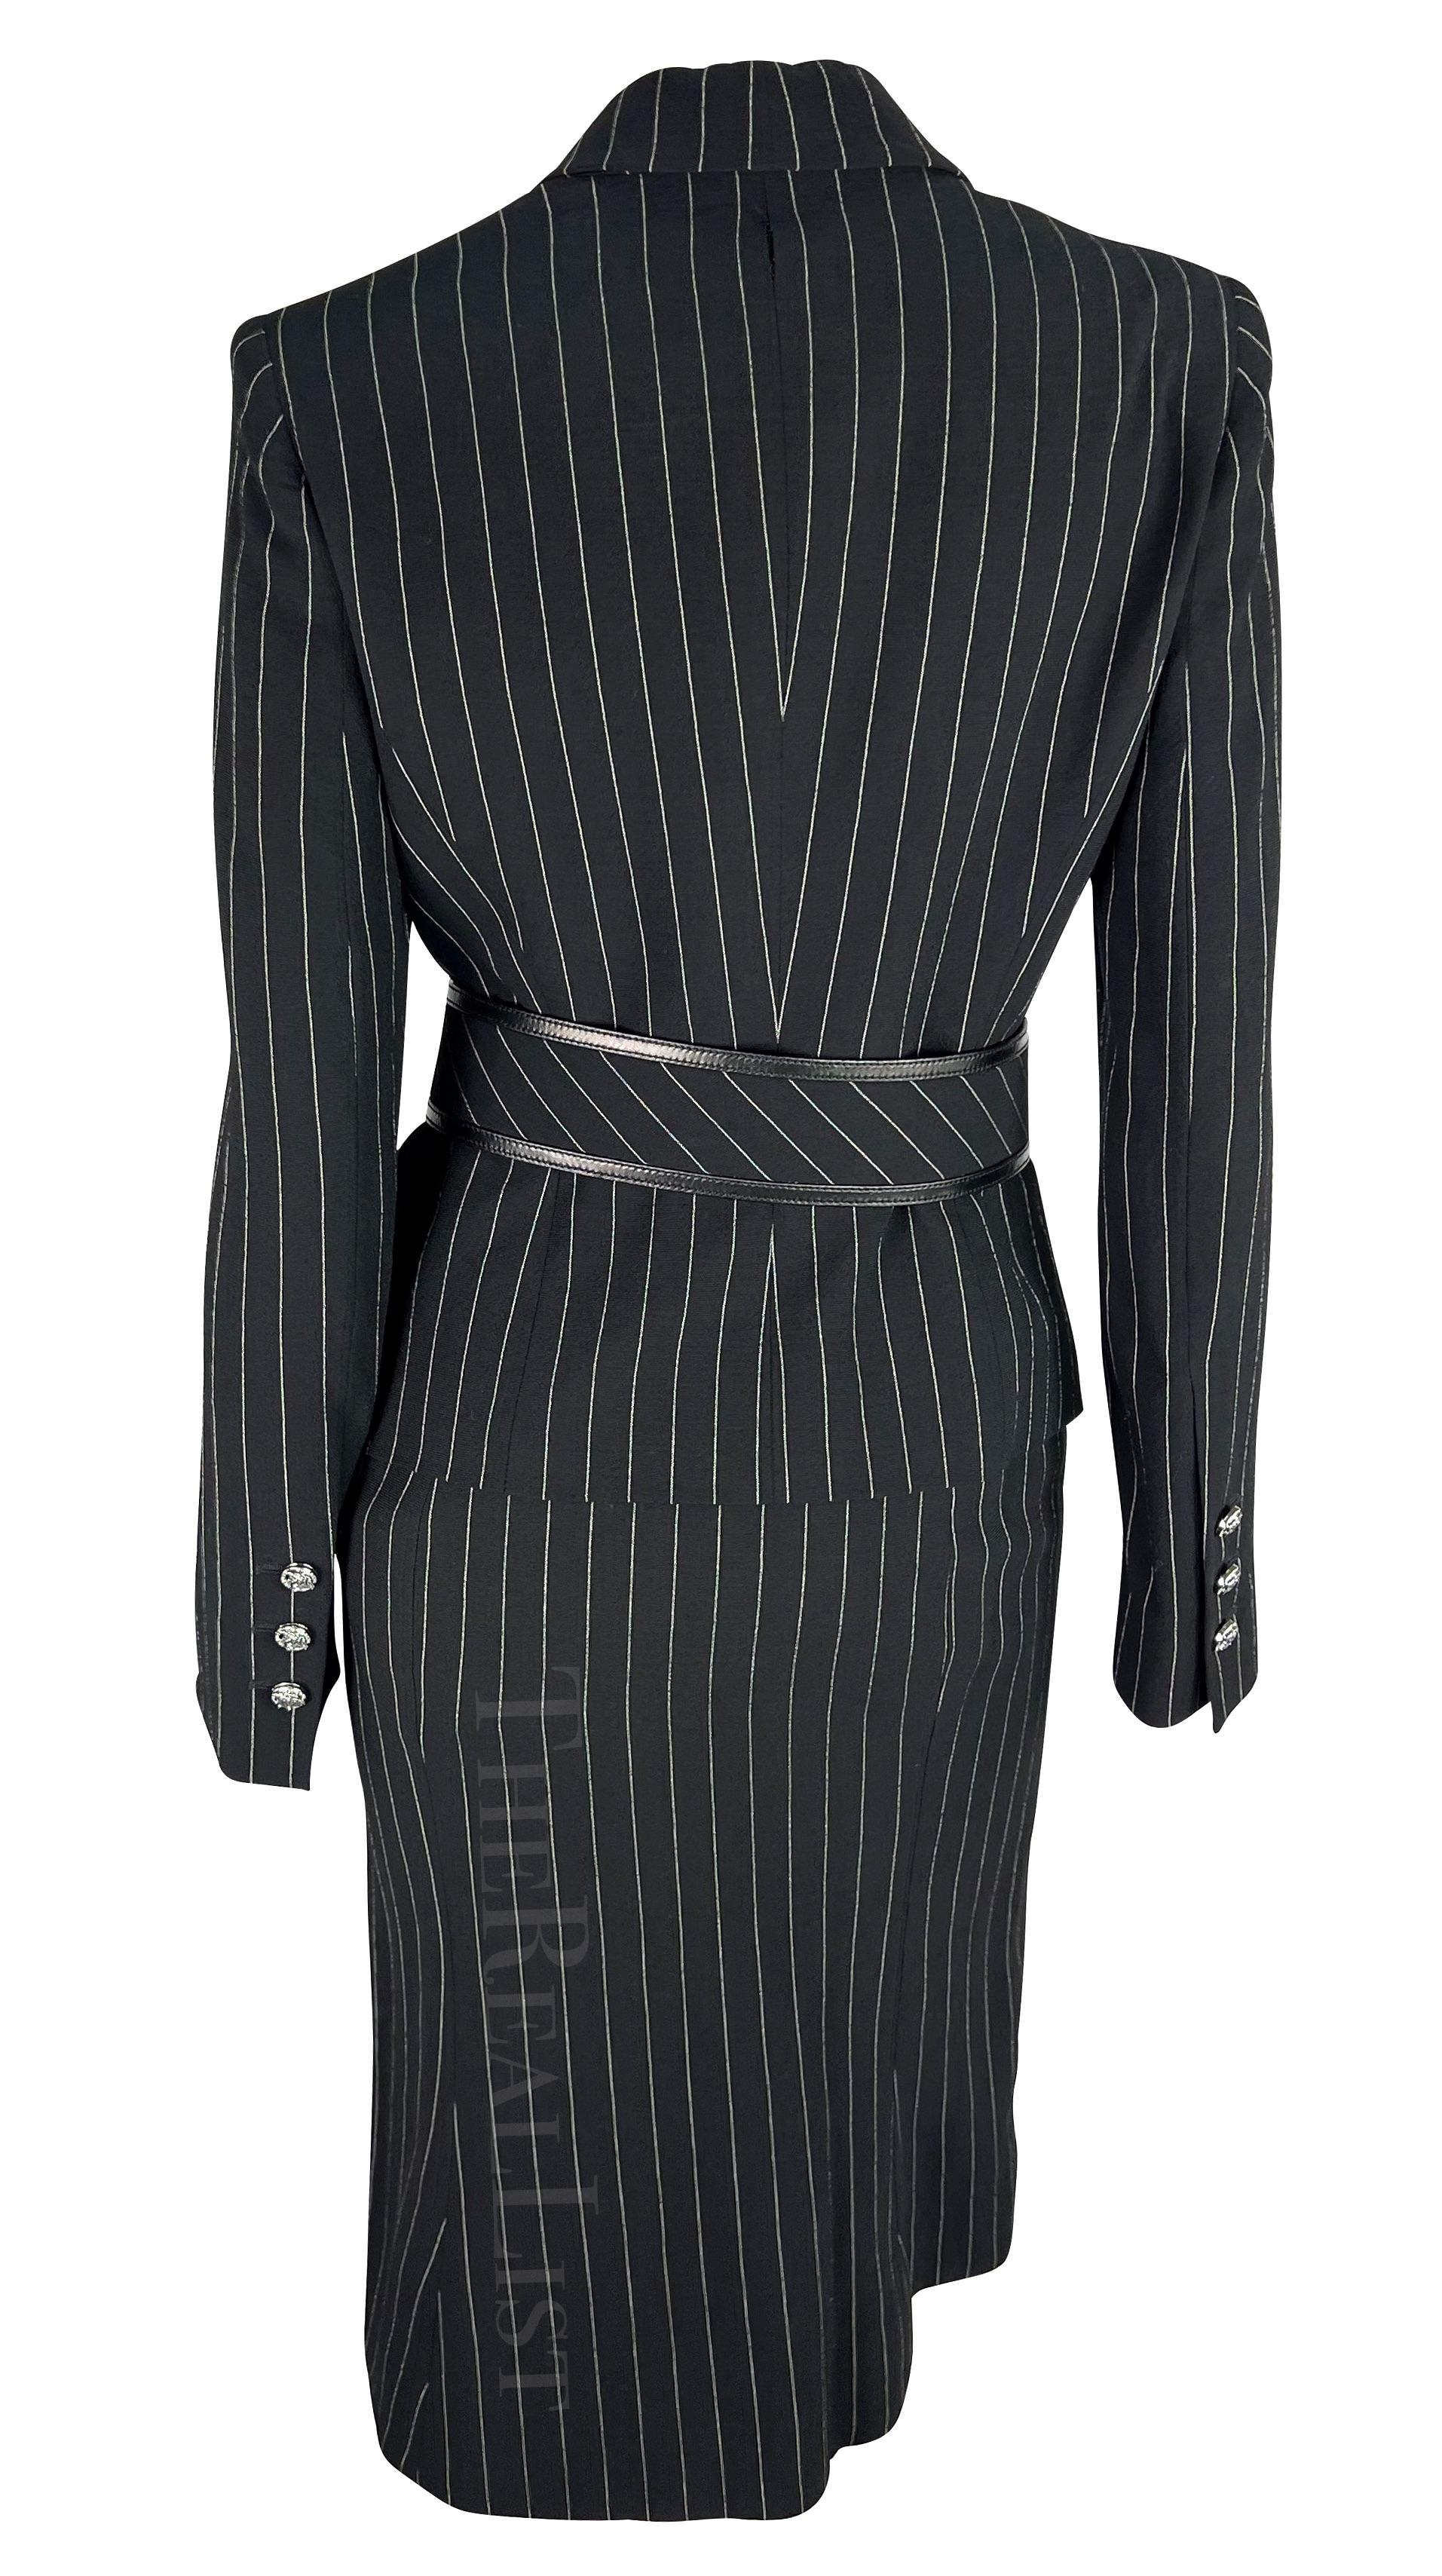 NWT F/W 2004 Versace by Donatella Black Wool Blend Pinstripe Medusa Belted Suit For Sale 2